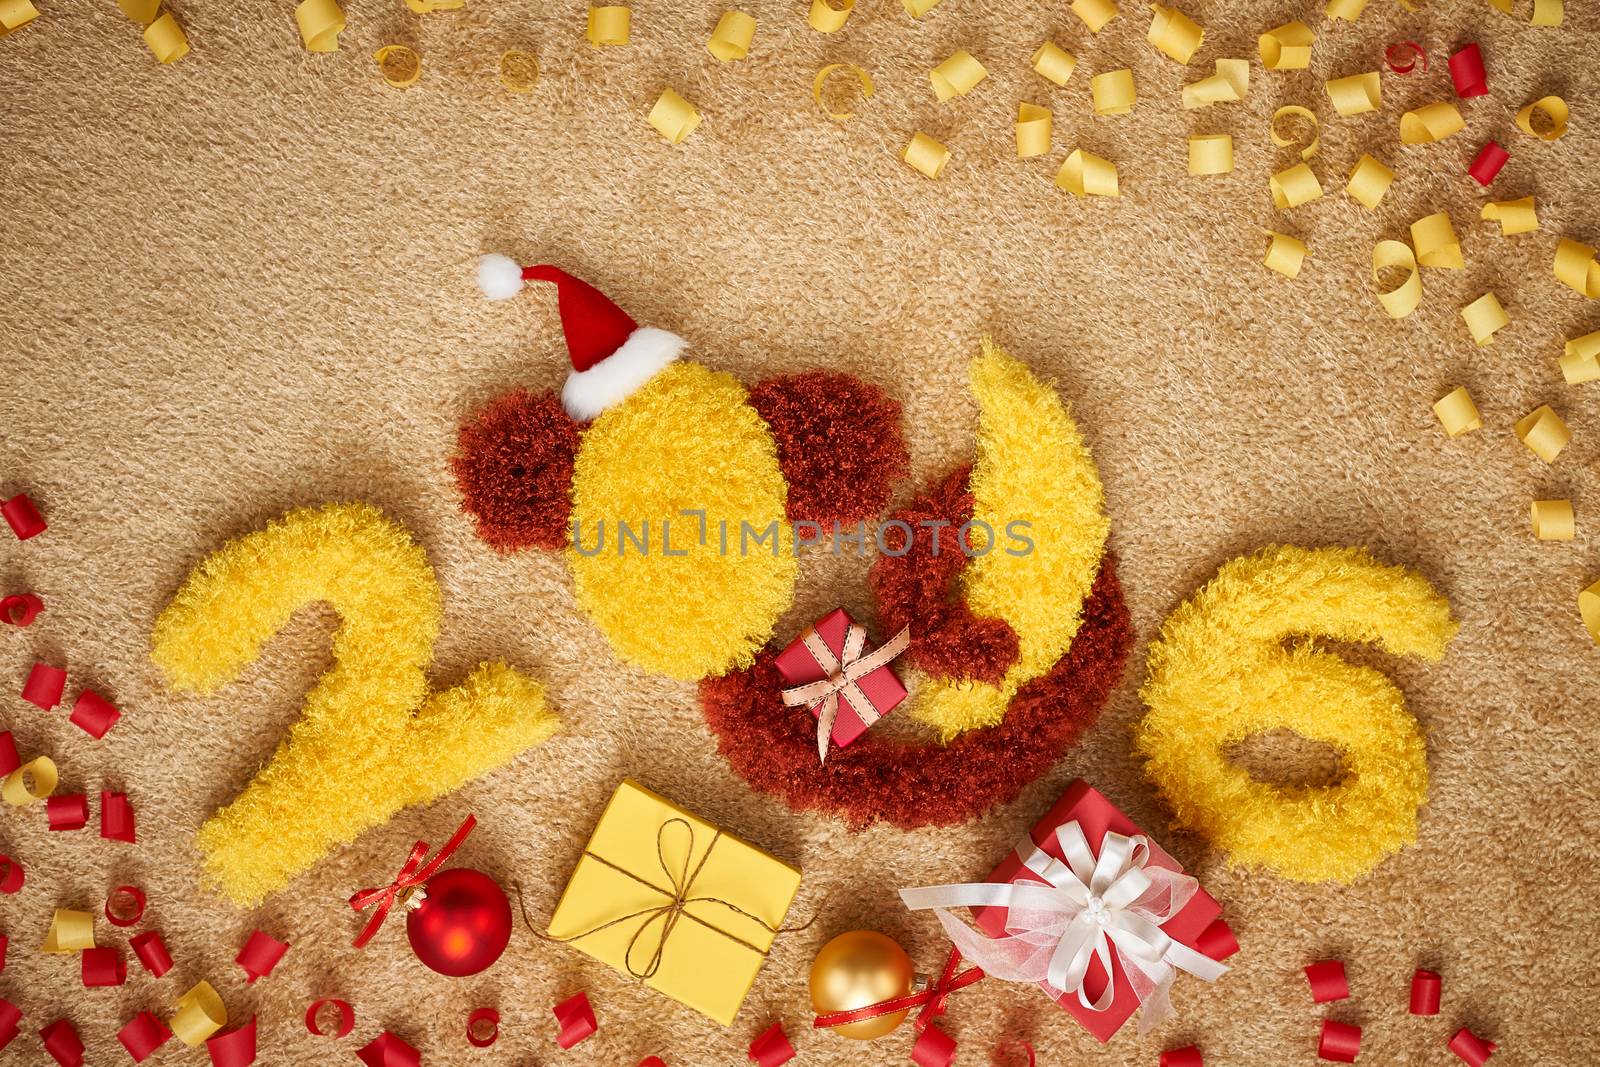 New Year 2016. Christmas.Funny monkey in Santa hat with banana,presents,serpentine. Happy vivid festive still life.Yellow digits handmade. Party decoration, gift box, unusual holiday card, copyspace